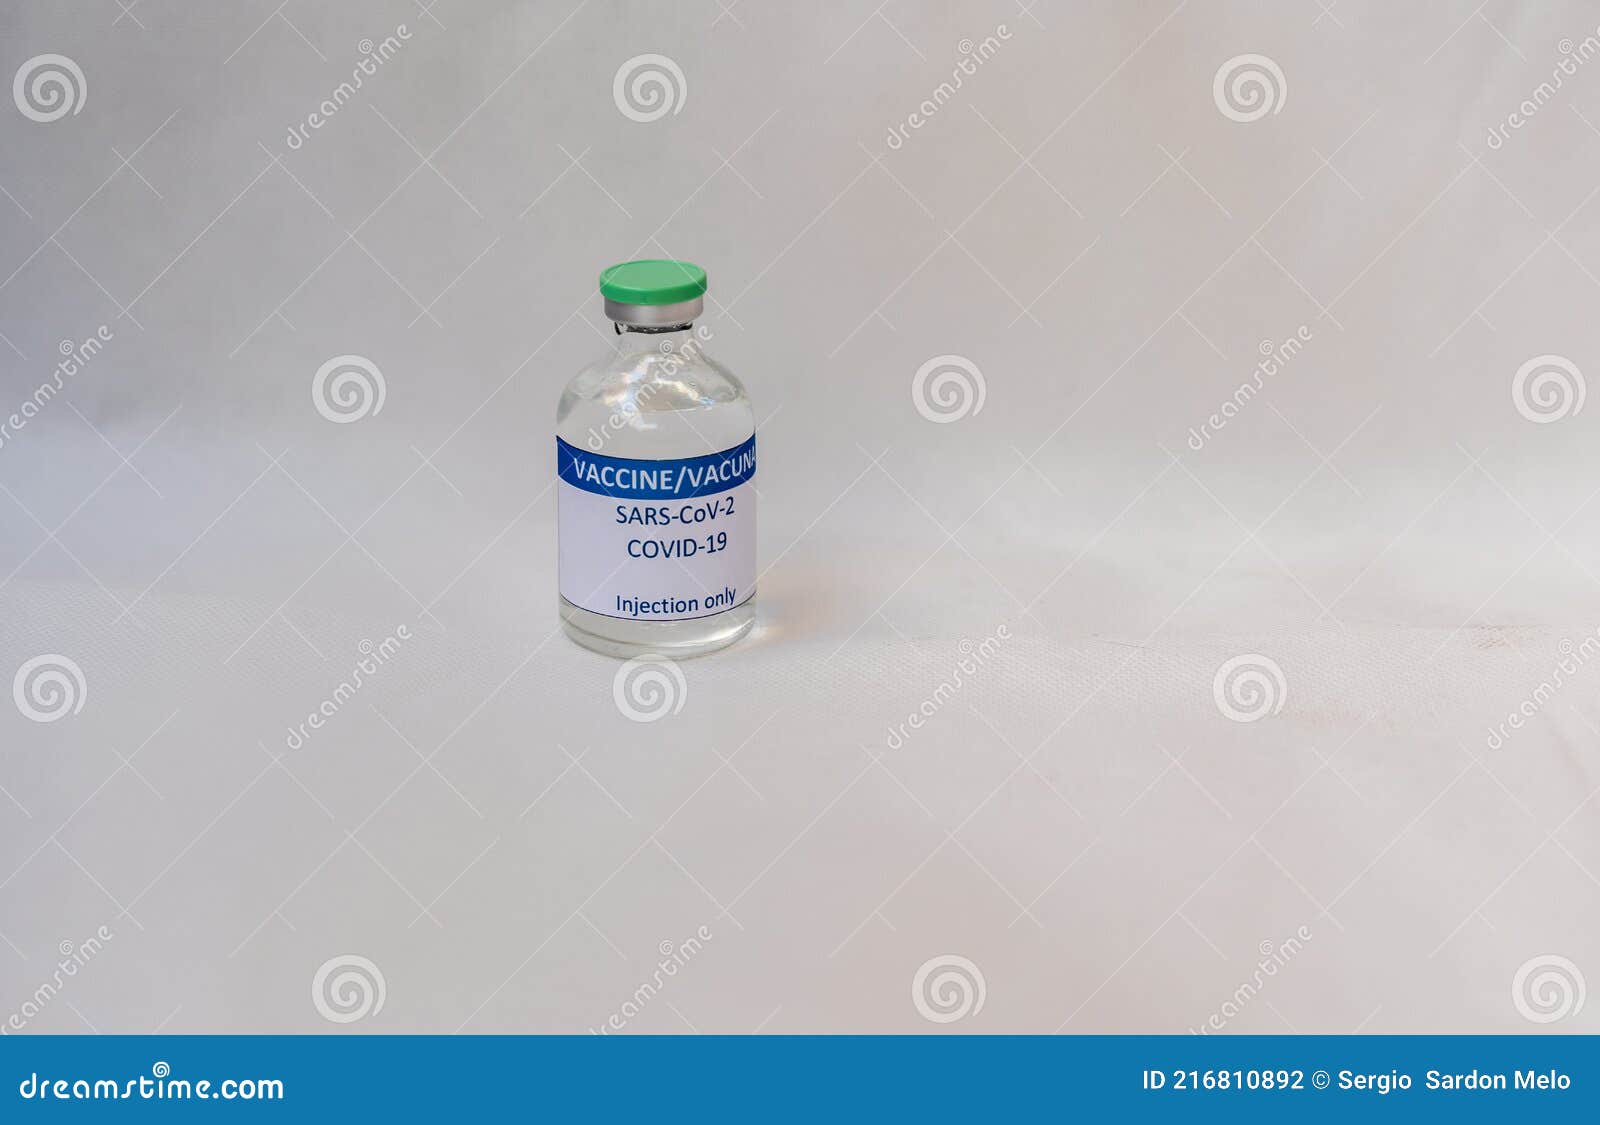 a vial with covid-19 vaccine